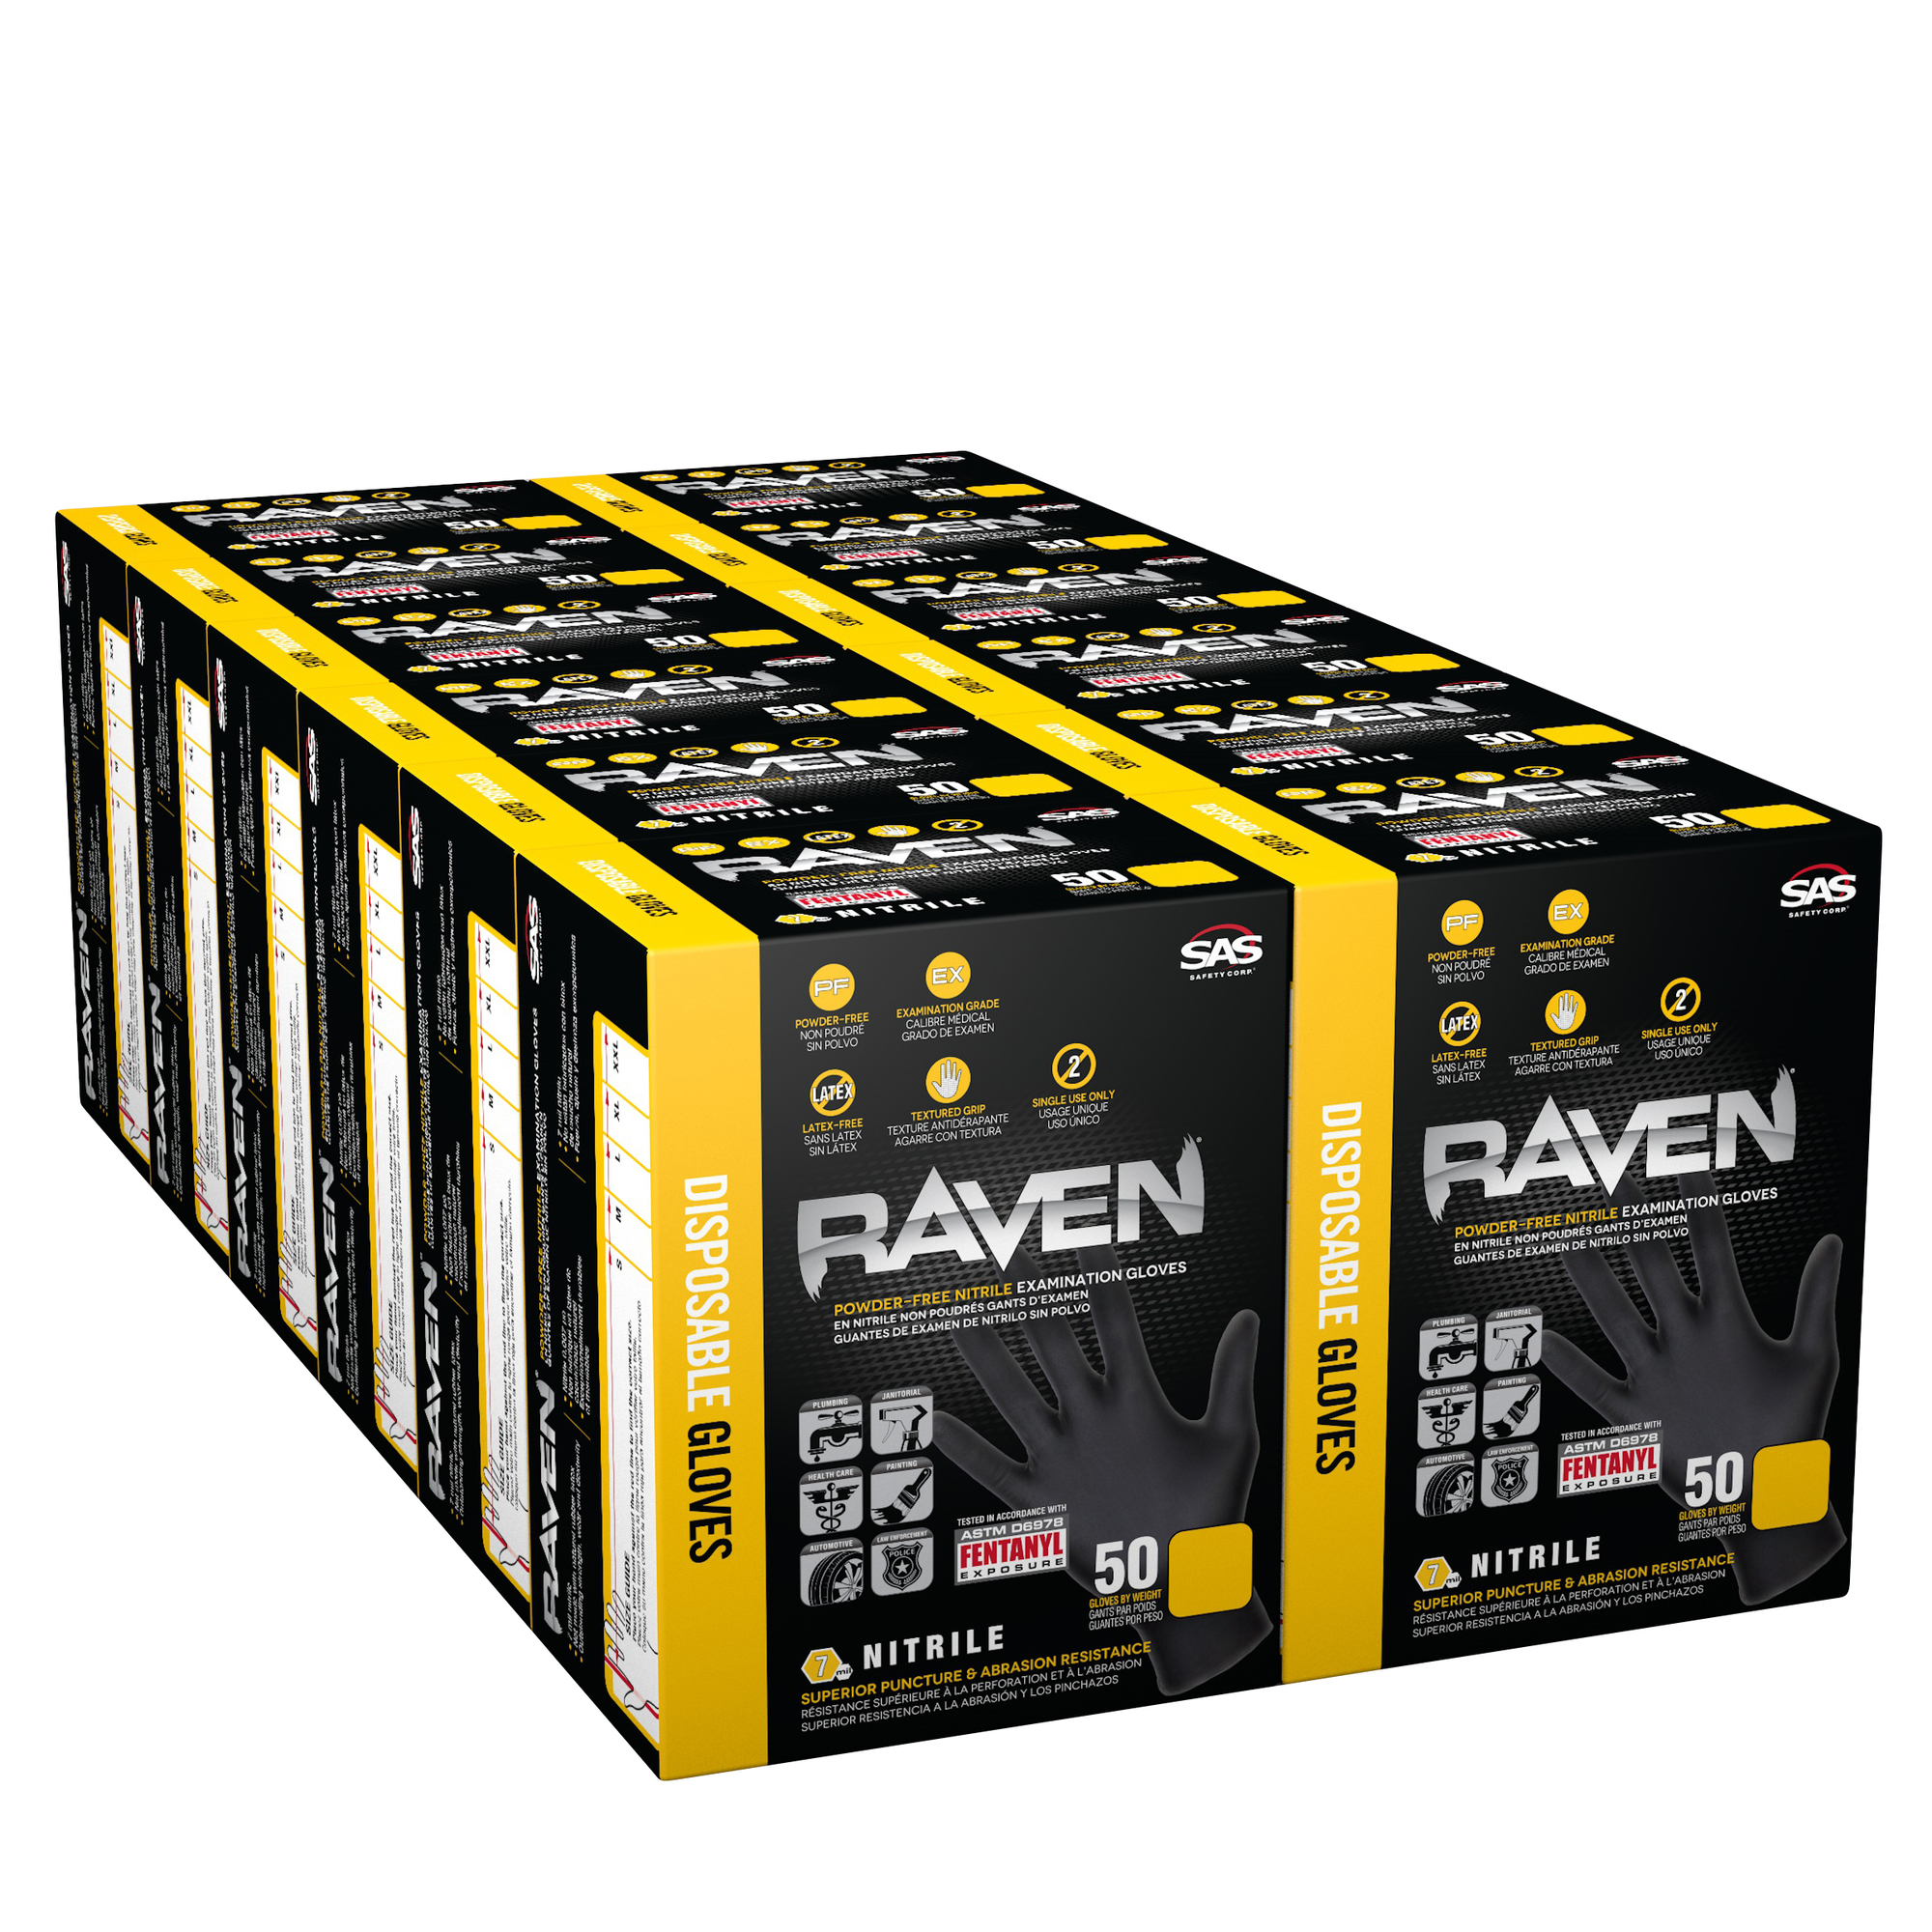 Raven, Case Raven Gloves 50 Packs 7Mil PF Exam Textured, Size XL, Color Black, Included (qty.) 600 Model 66519-01CASE